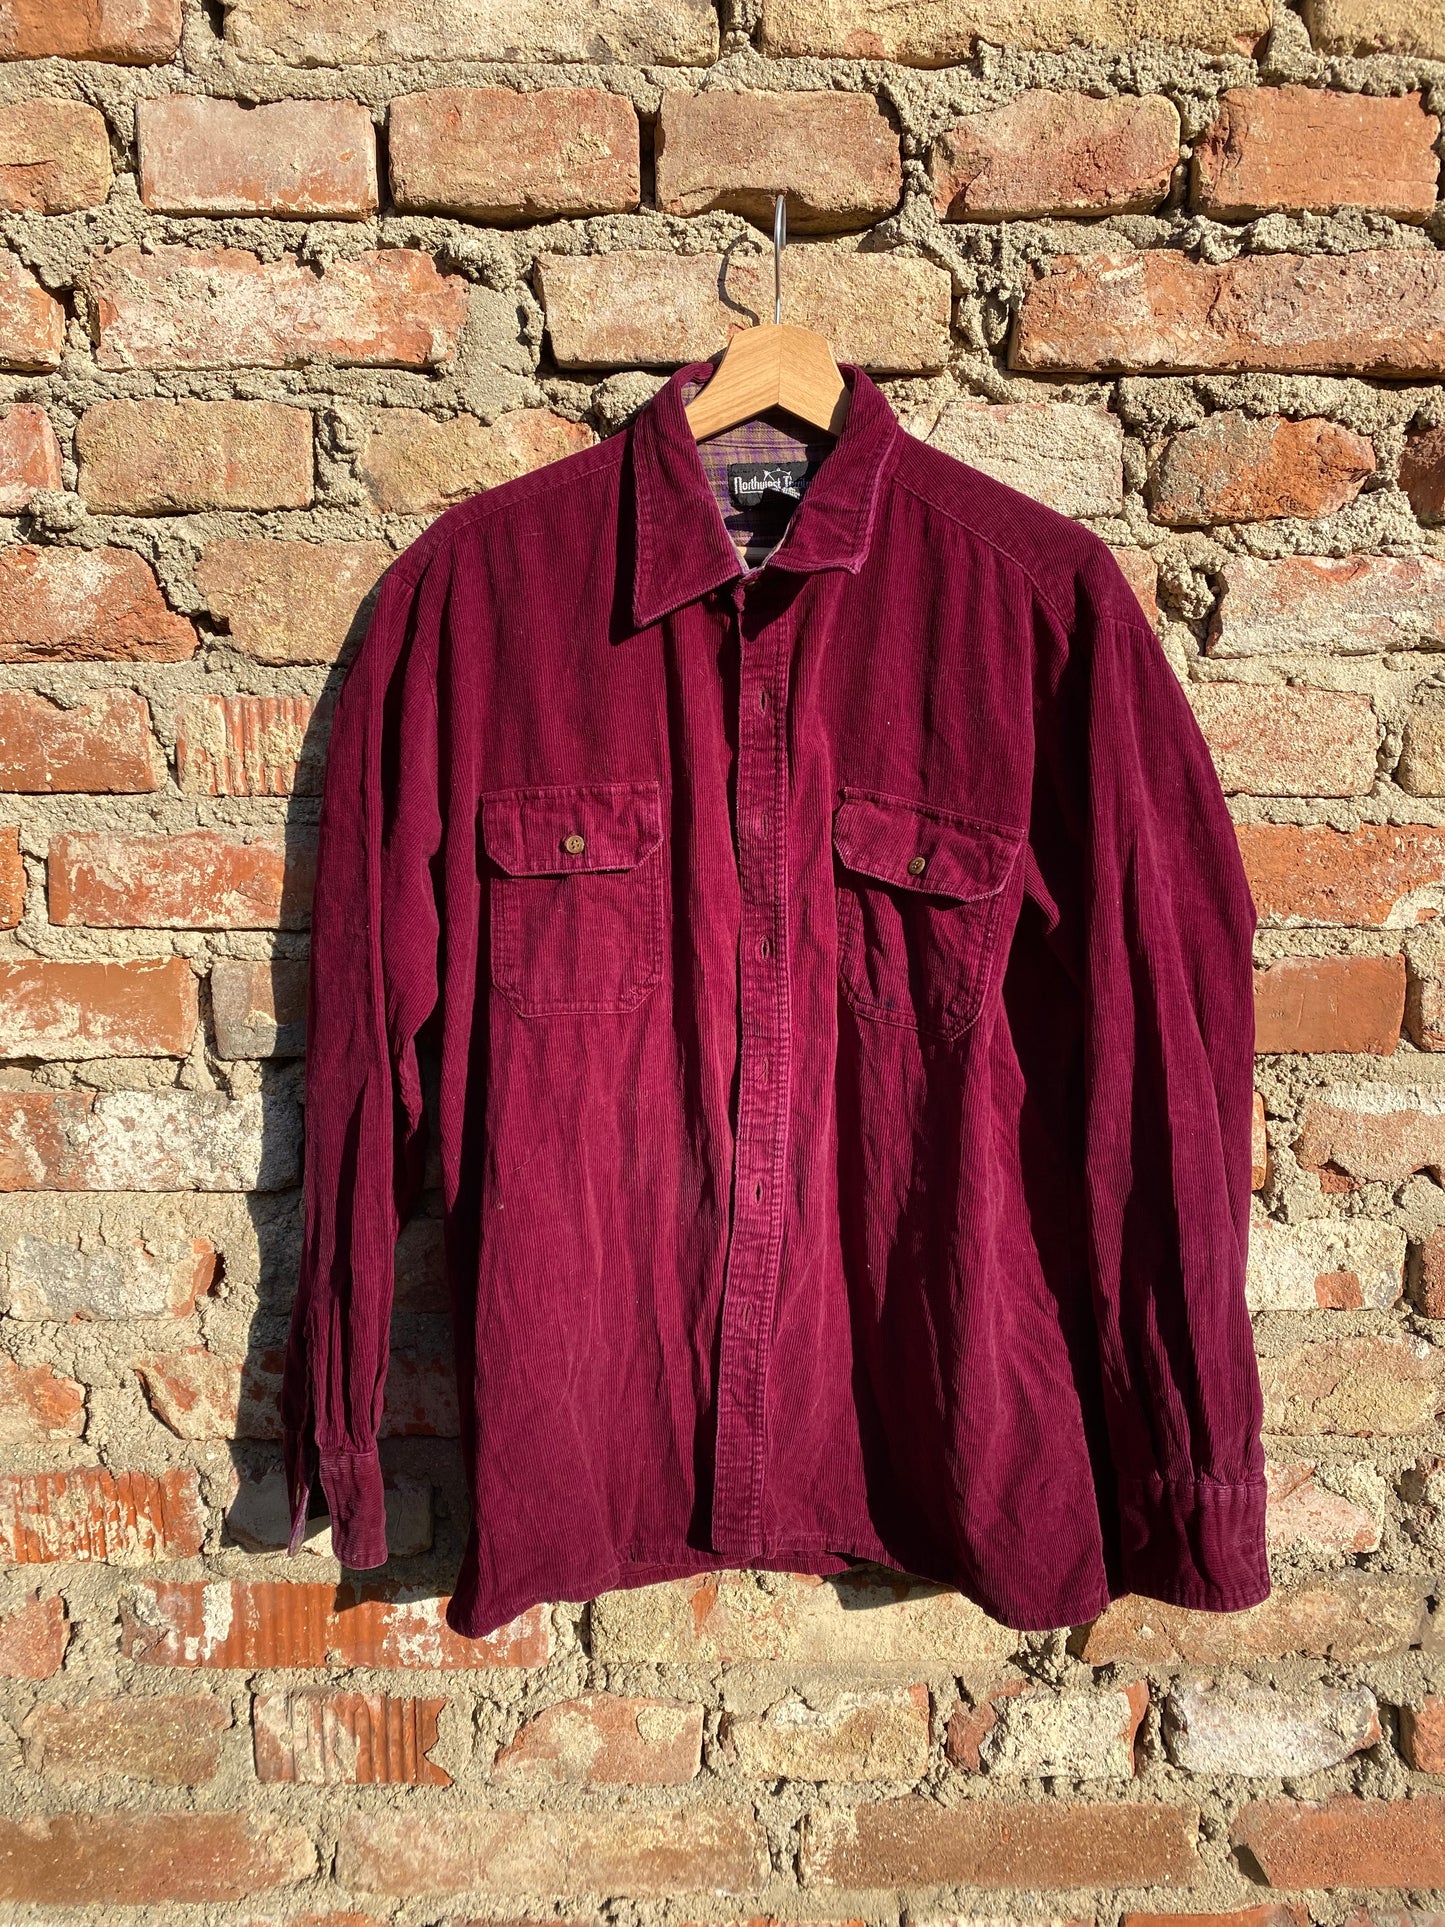 Vintage Red shirt - size M